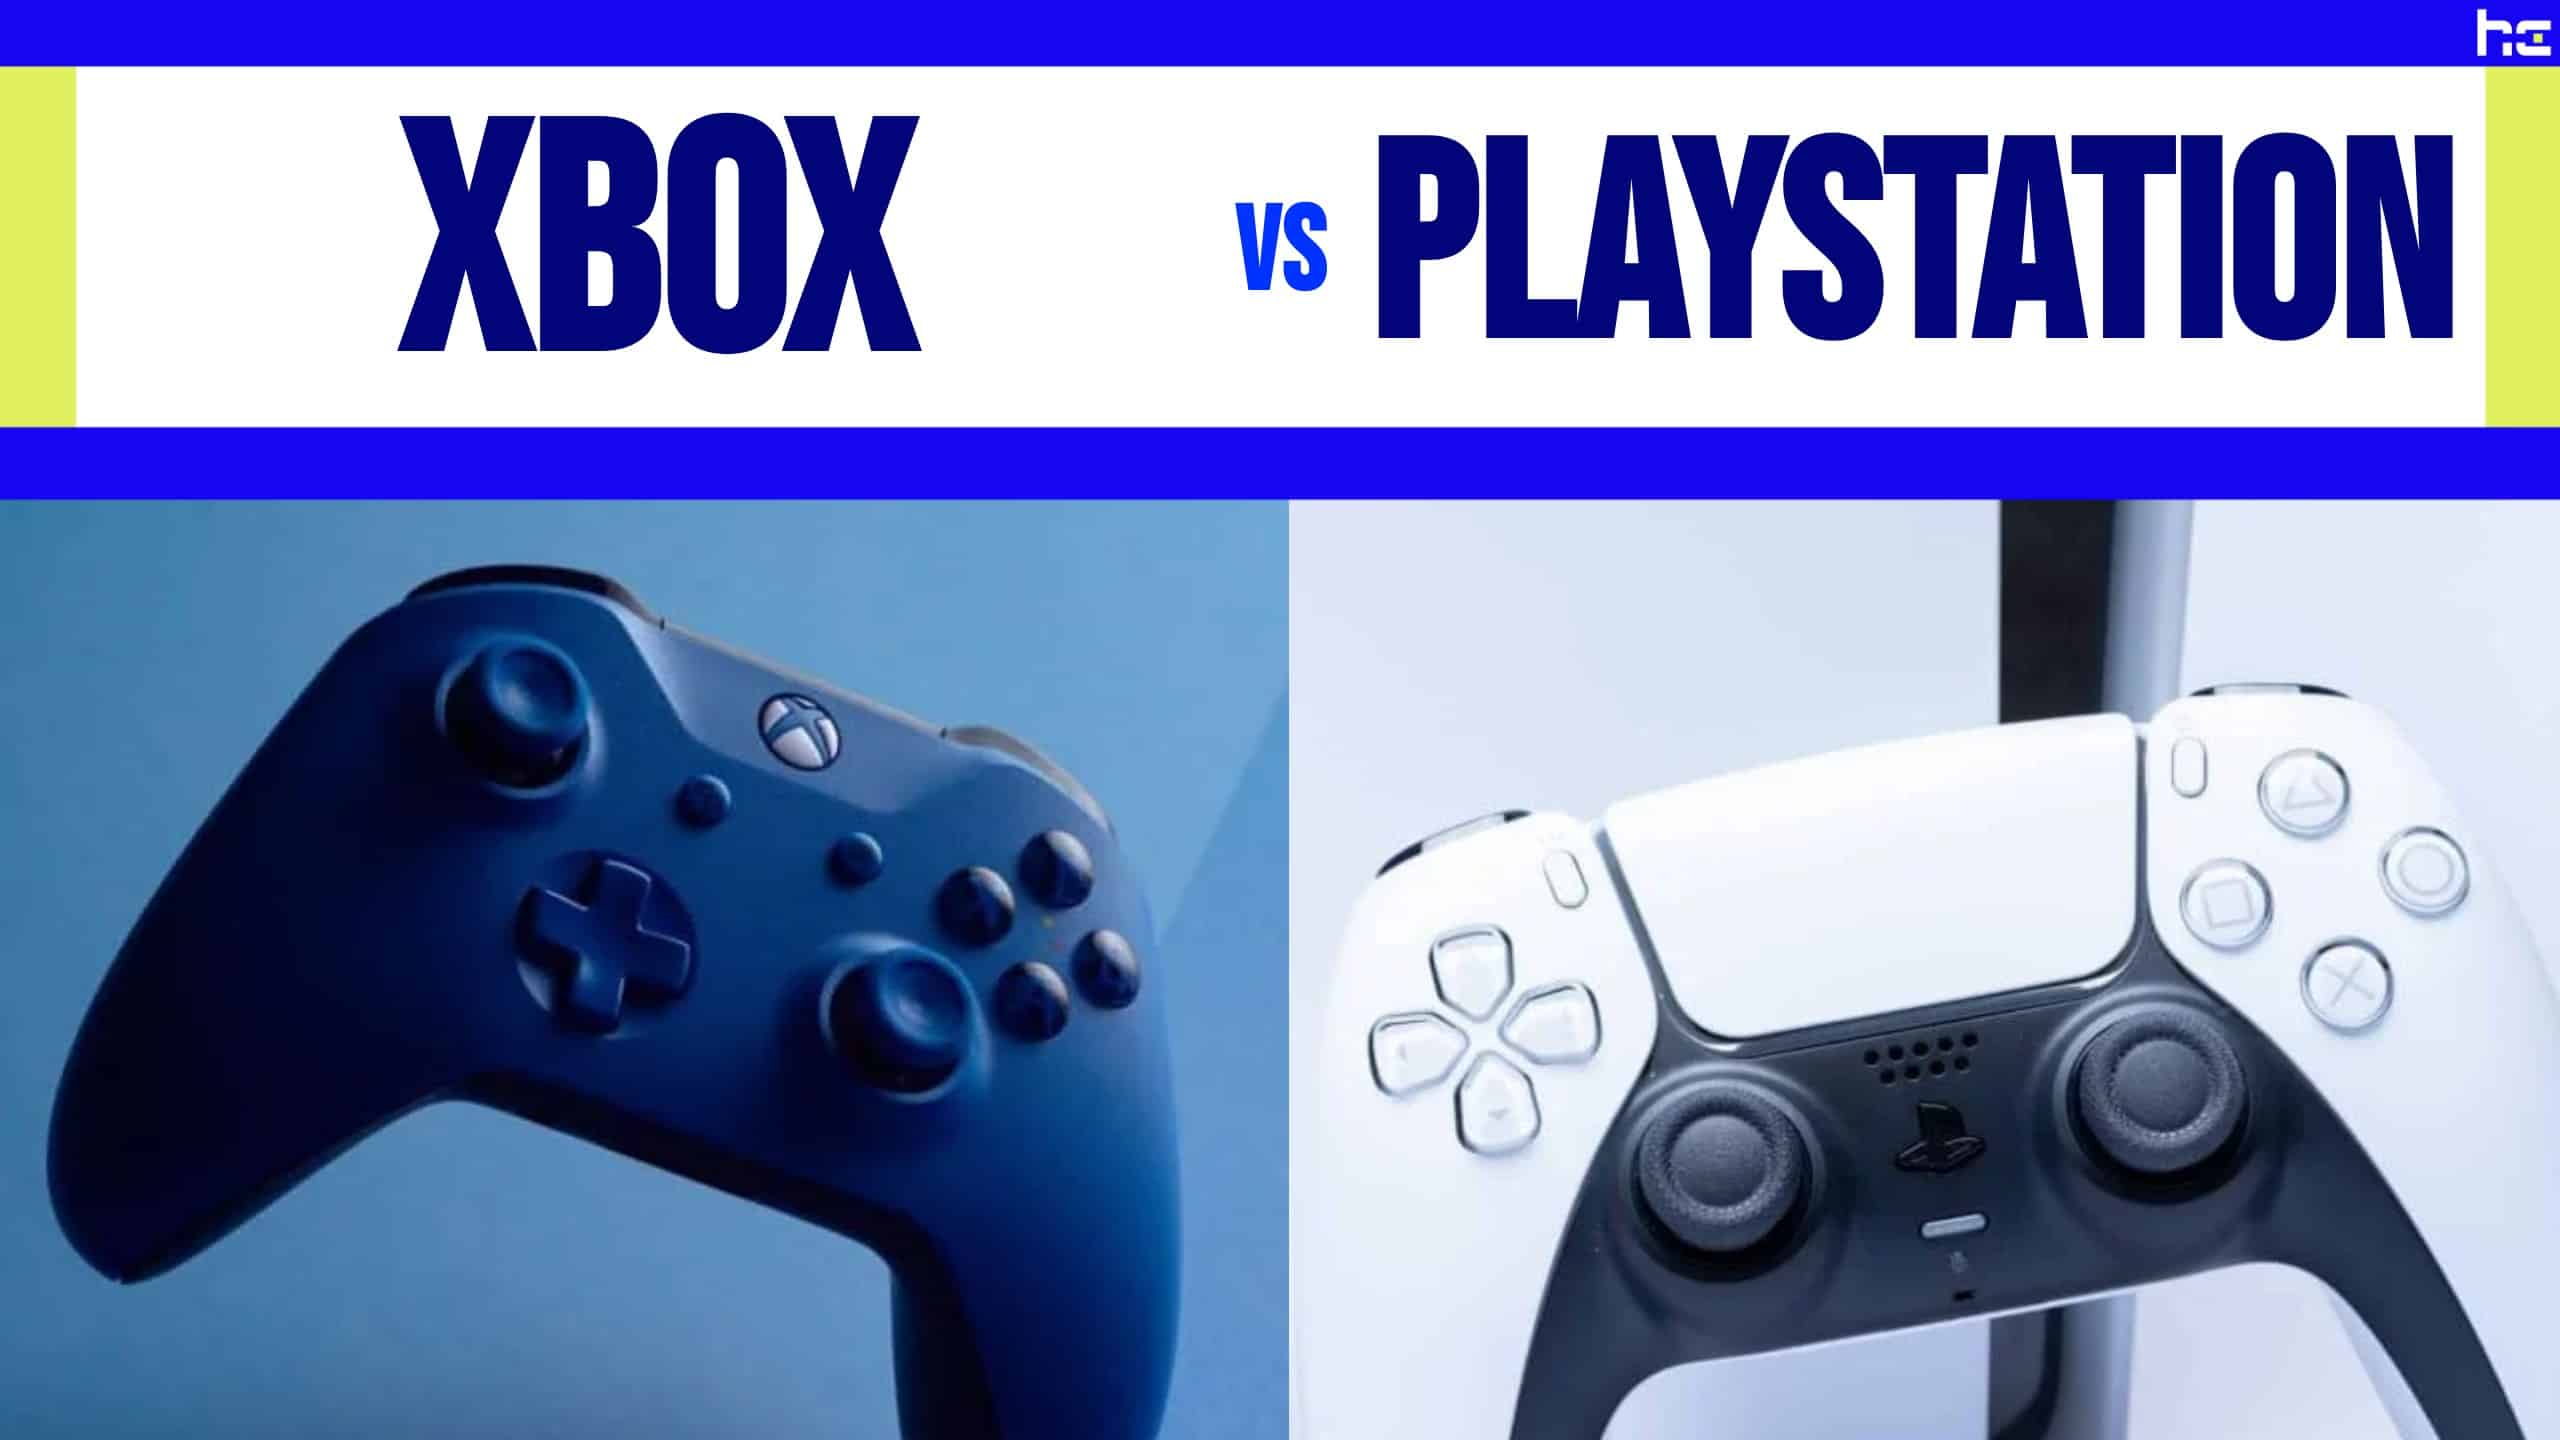 xbox vs playstation featured image